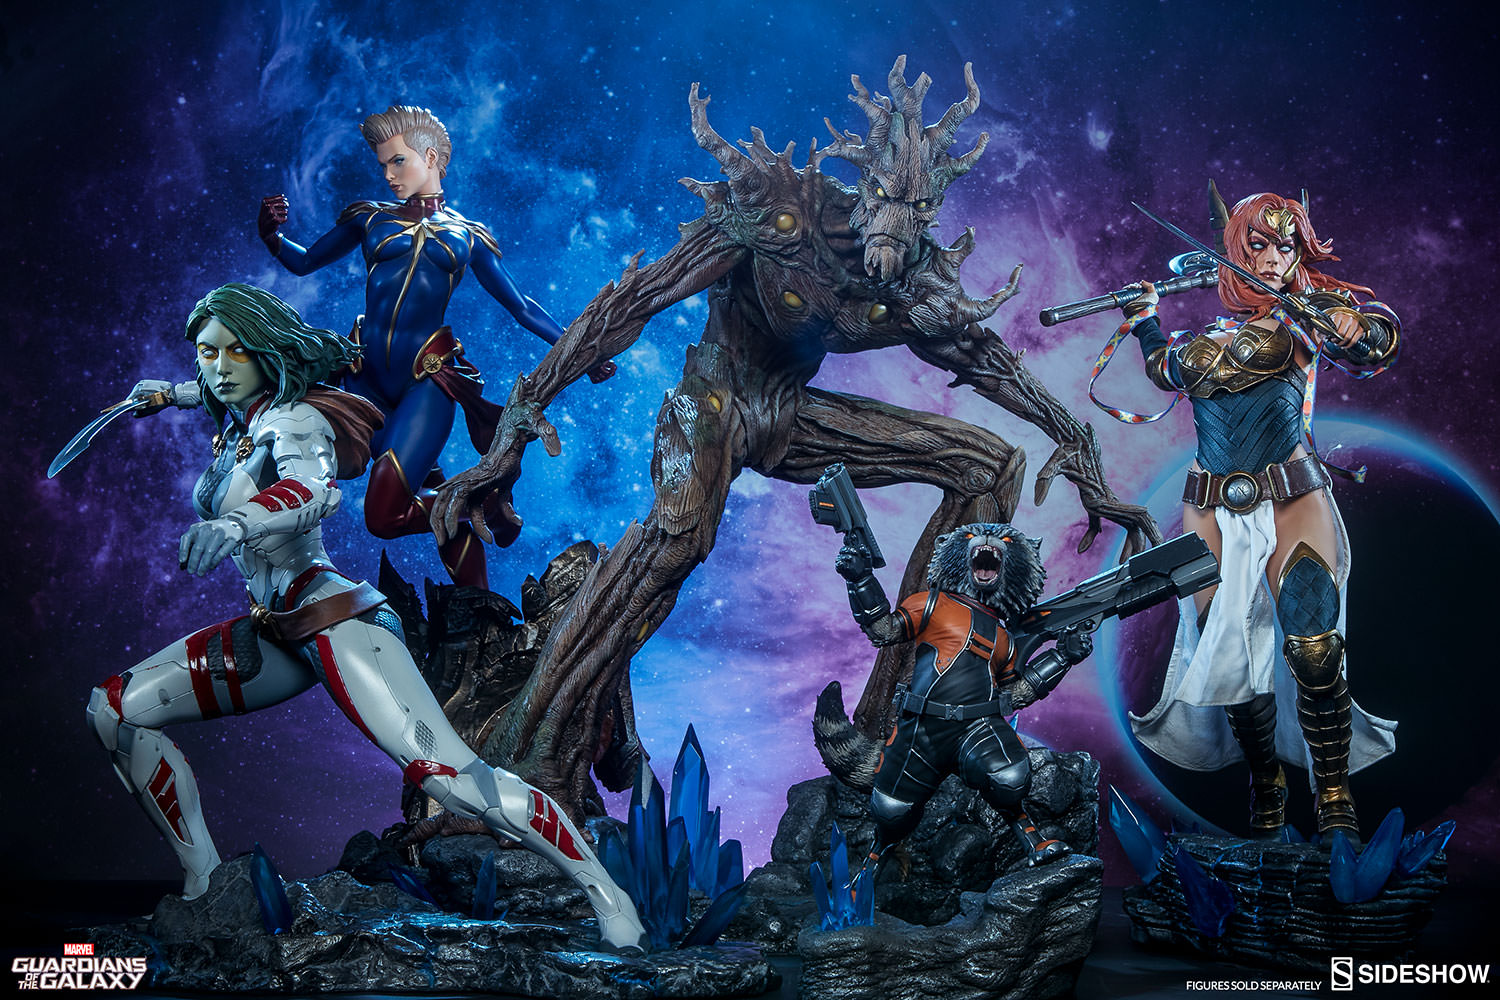 Sideshow-Collectibles-Guardians-of-the-Galaxy-Premium-Format-Figures-Statues.jpg